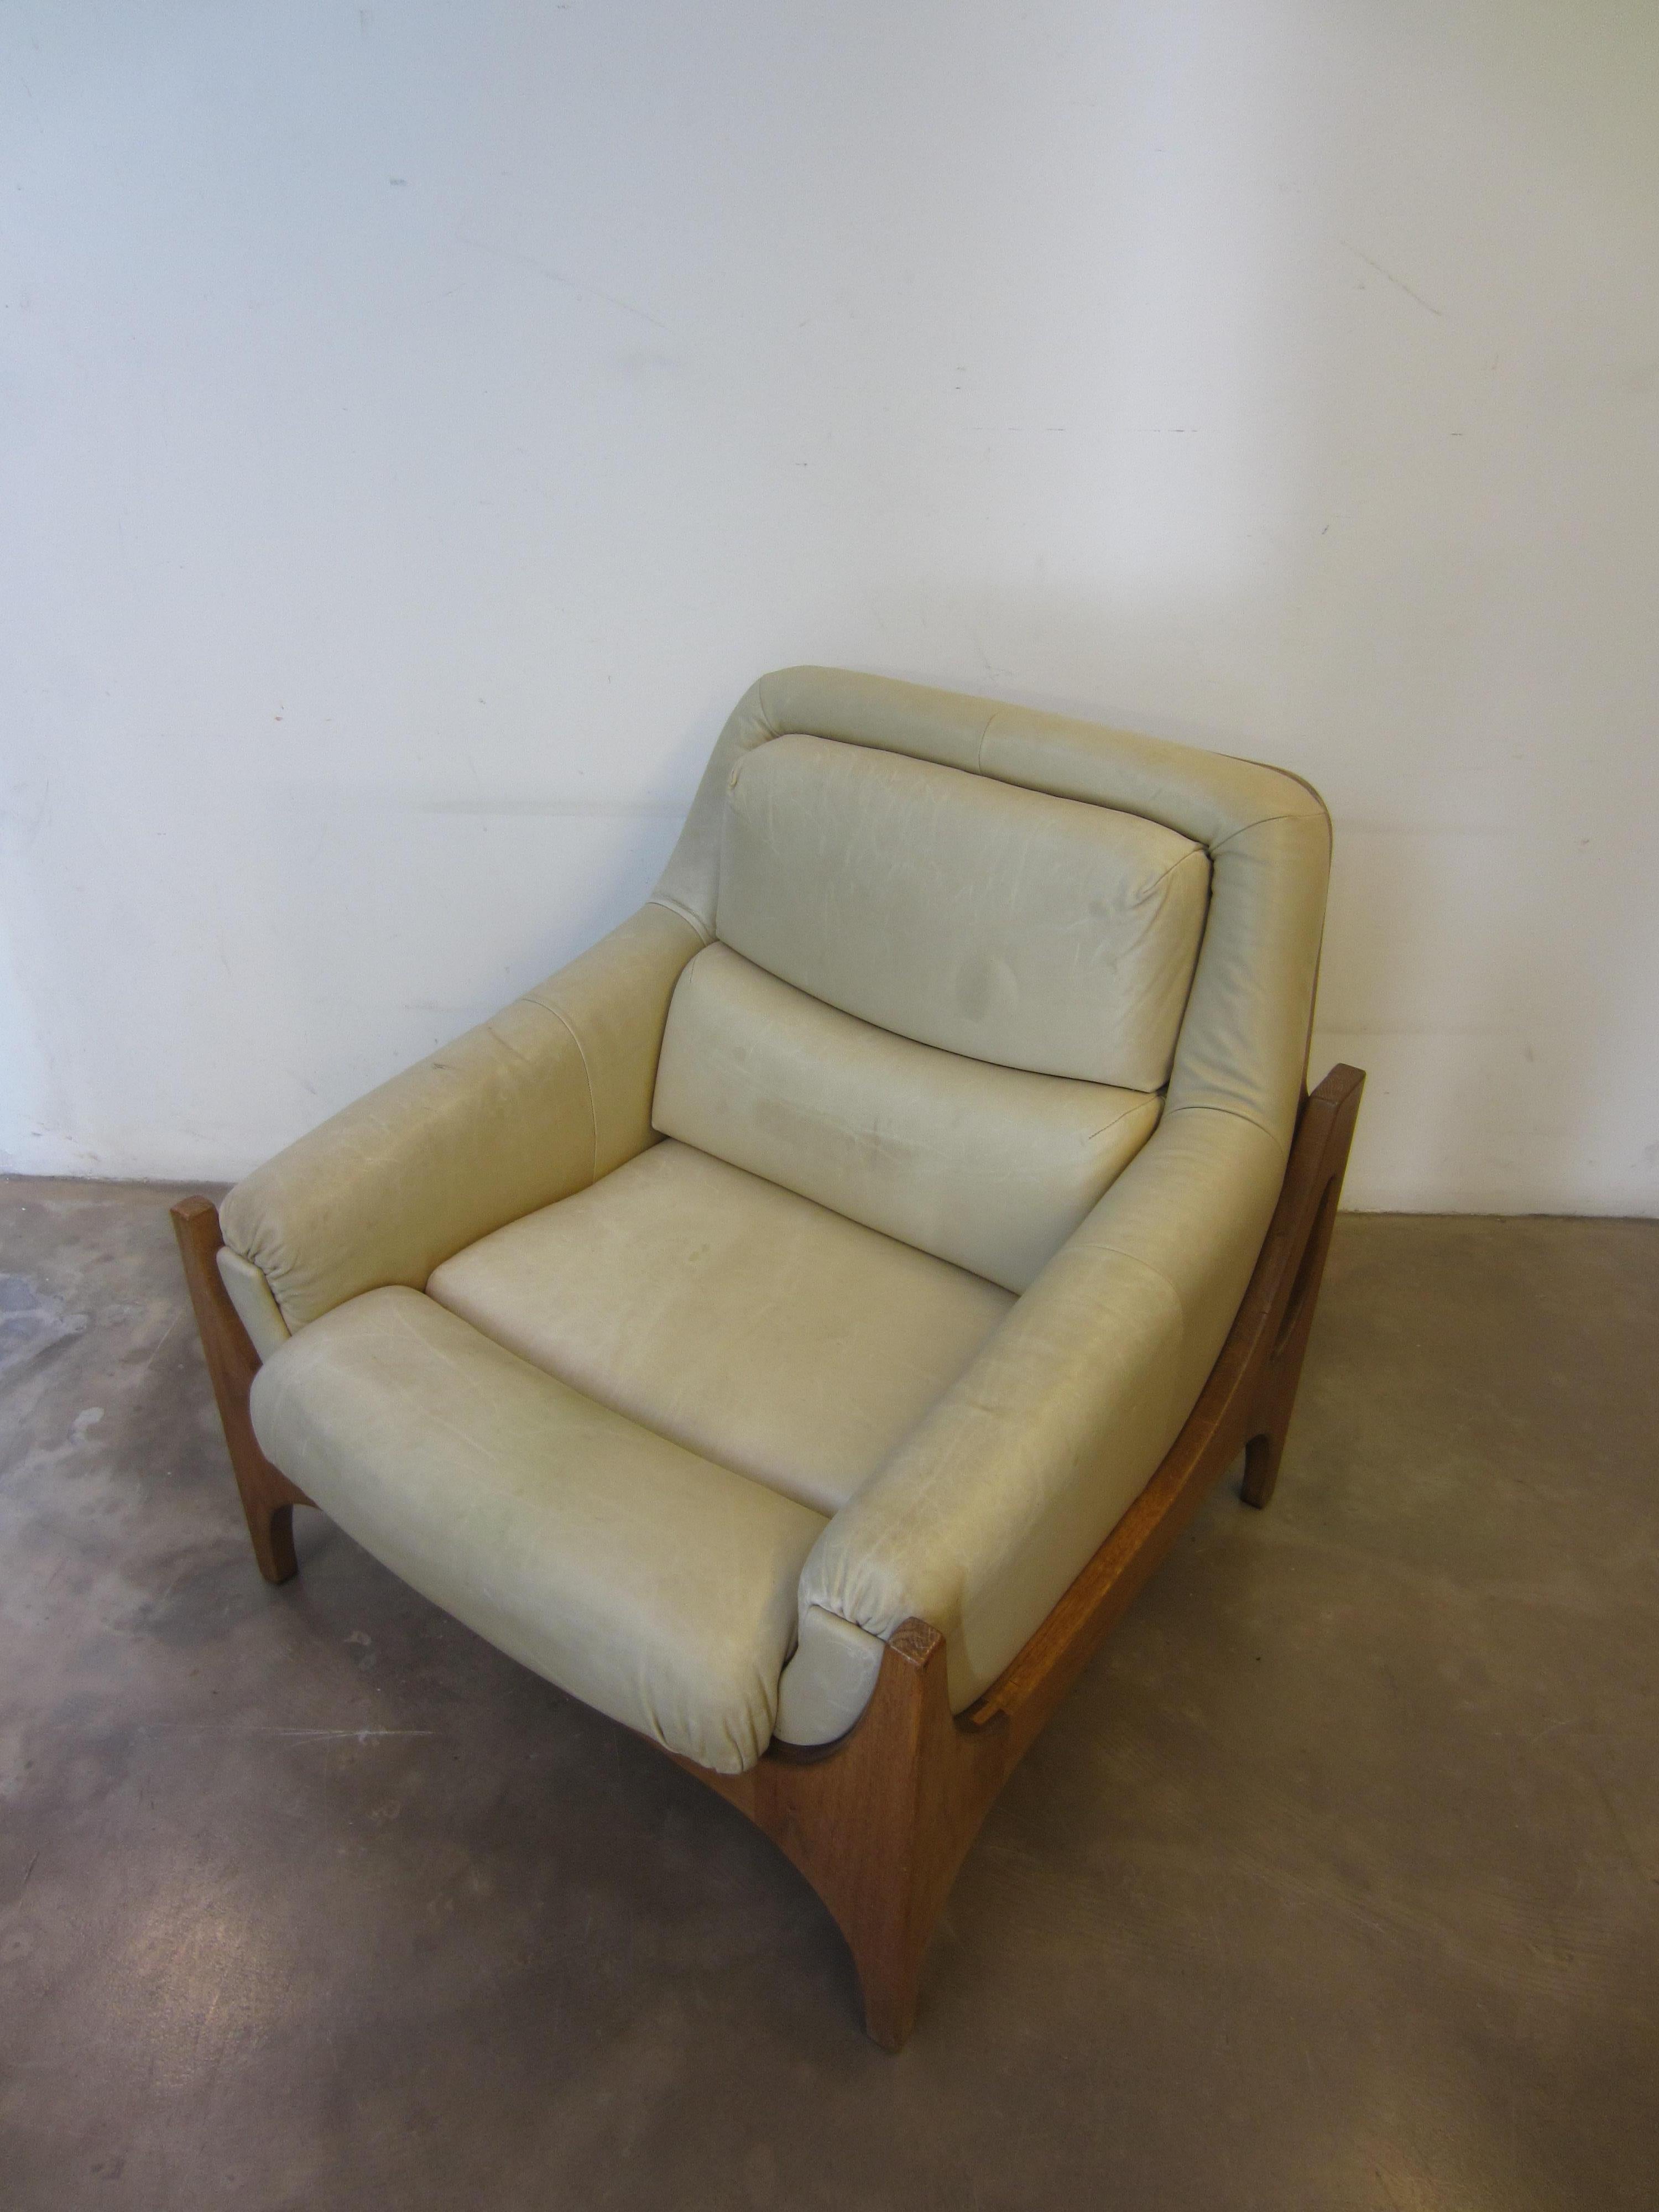 Wonderful Scandinavian armchair made in oakwood and leather. 
Beautiful details in the wood joints, good condition. 

Condition: Fairly good, leather has a circle and is slightly damaged on the left side. There is damage to the wood of a back